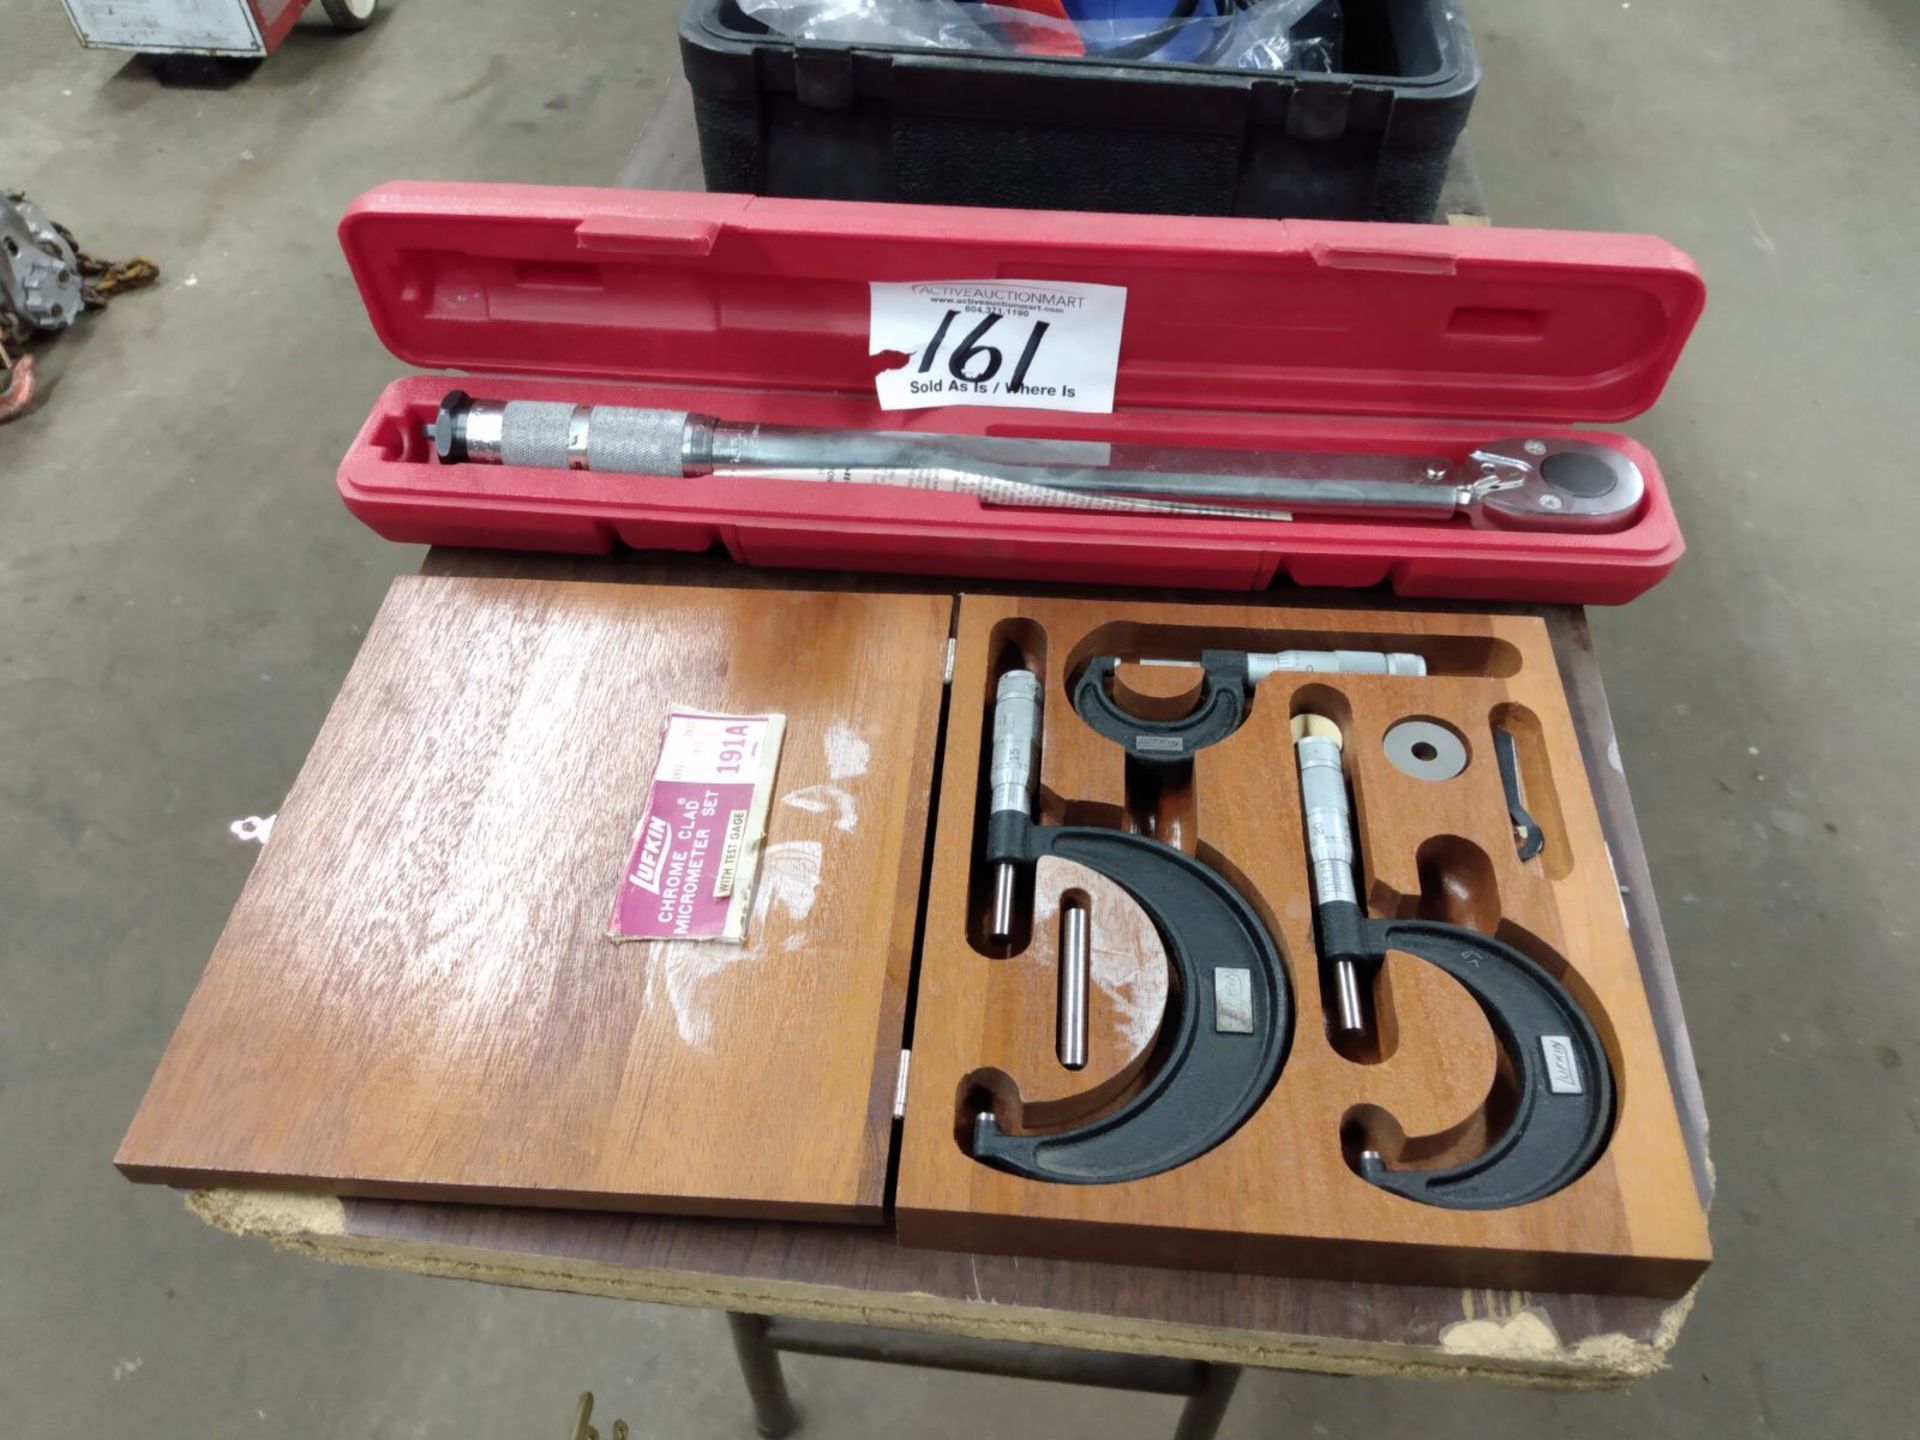 Proto Torque Wrench and Micrometre Set